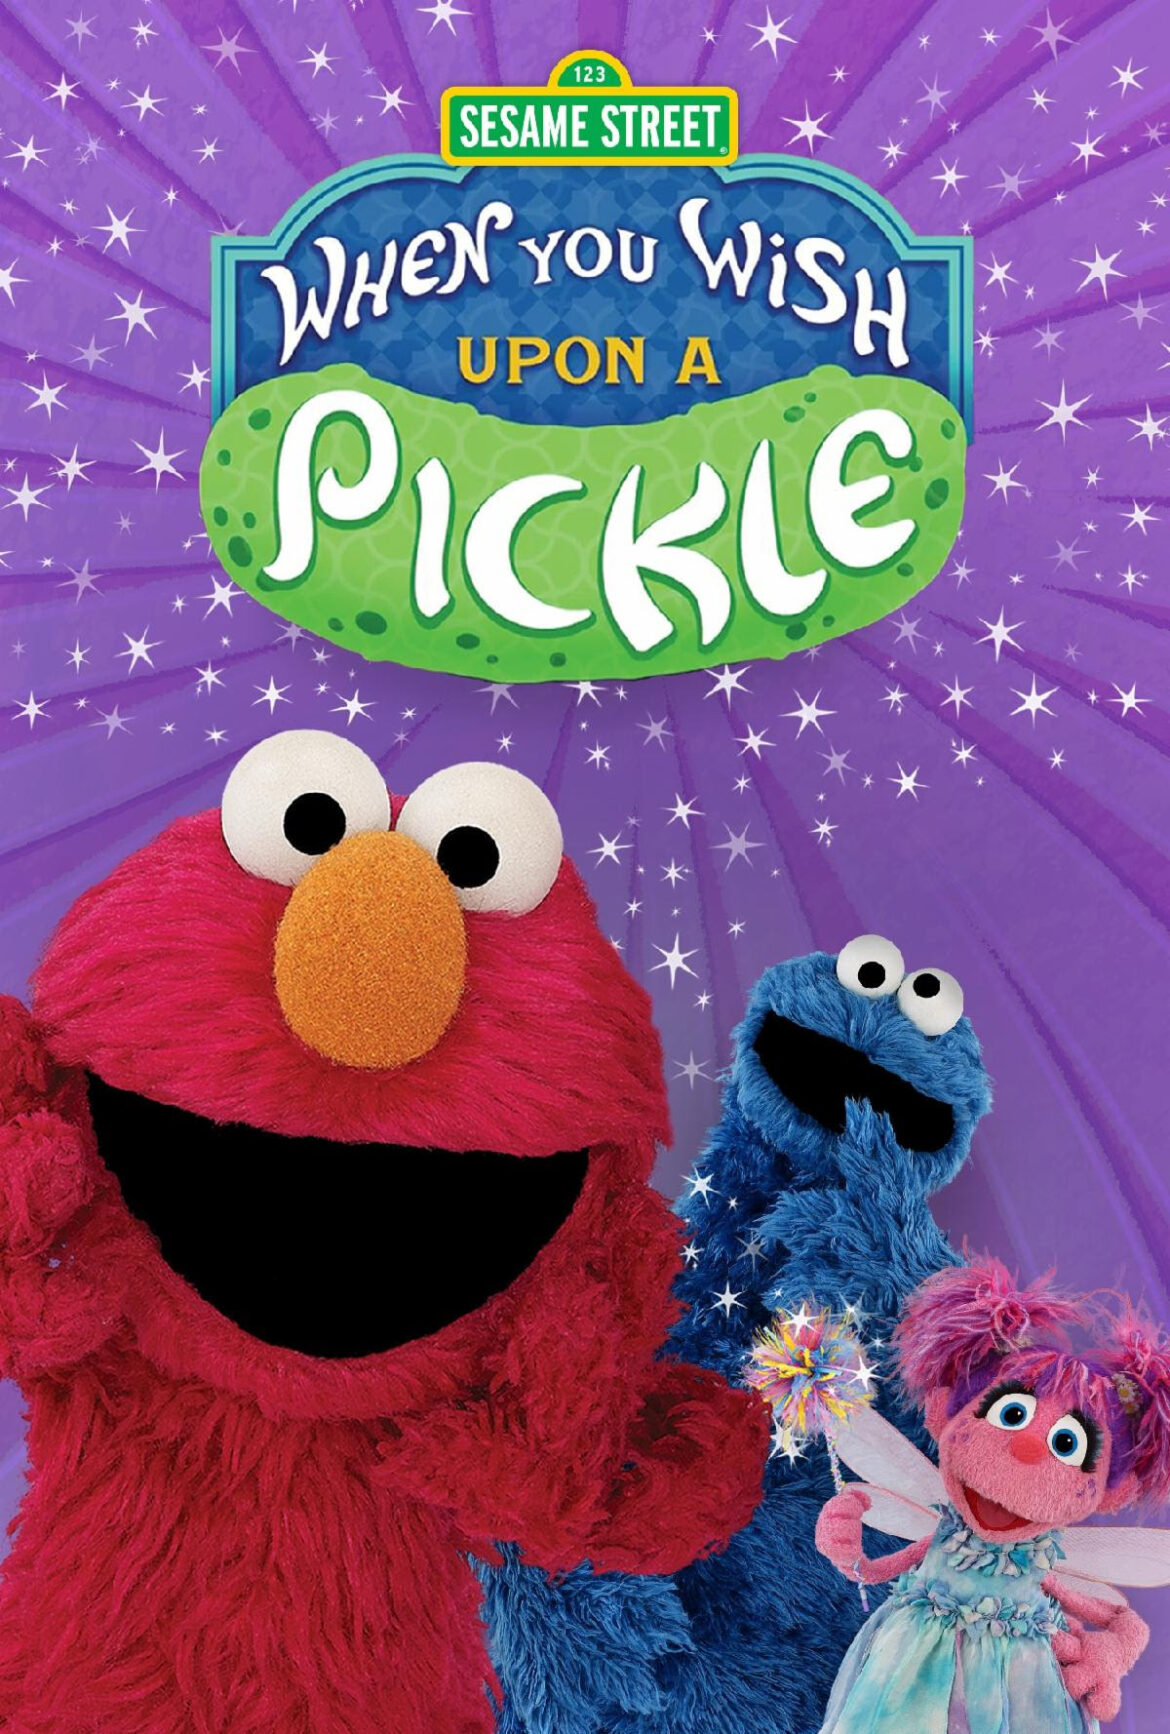 When You Wish Upon A Pickle: A Sesame Street Special (2020)